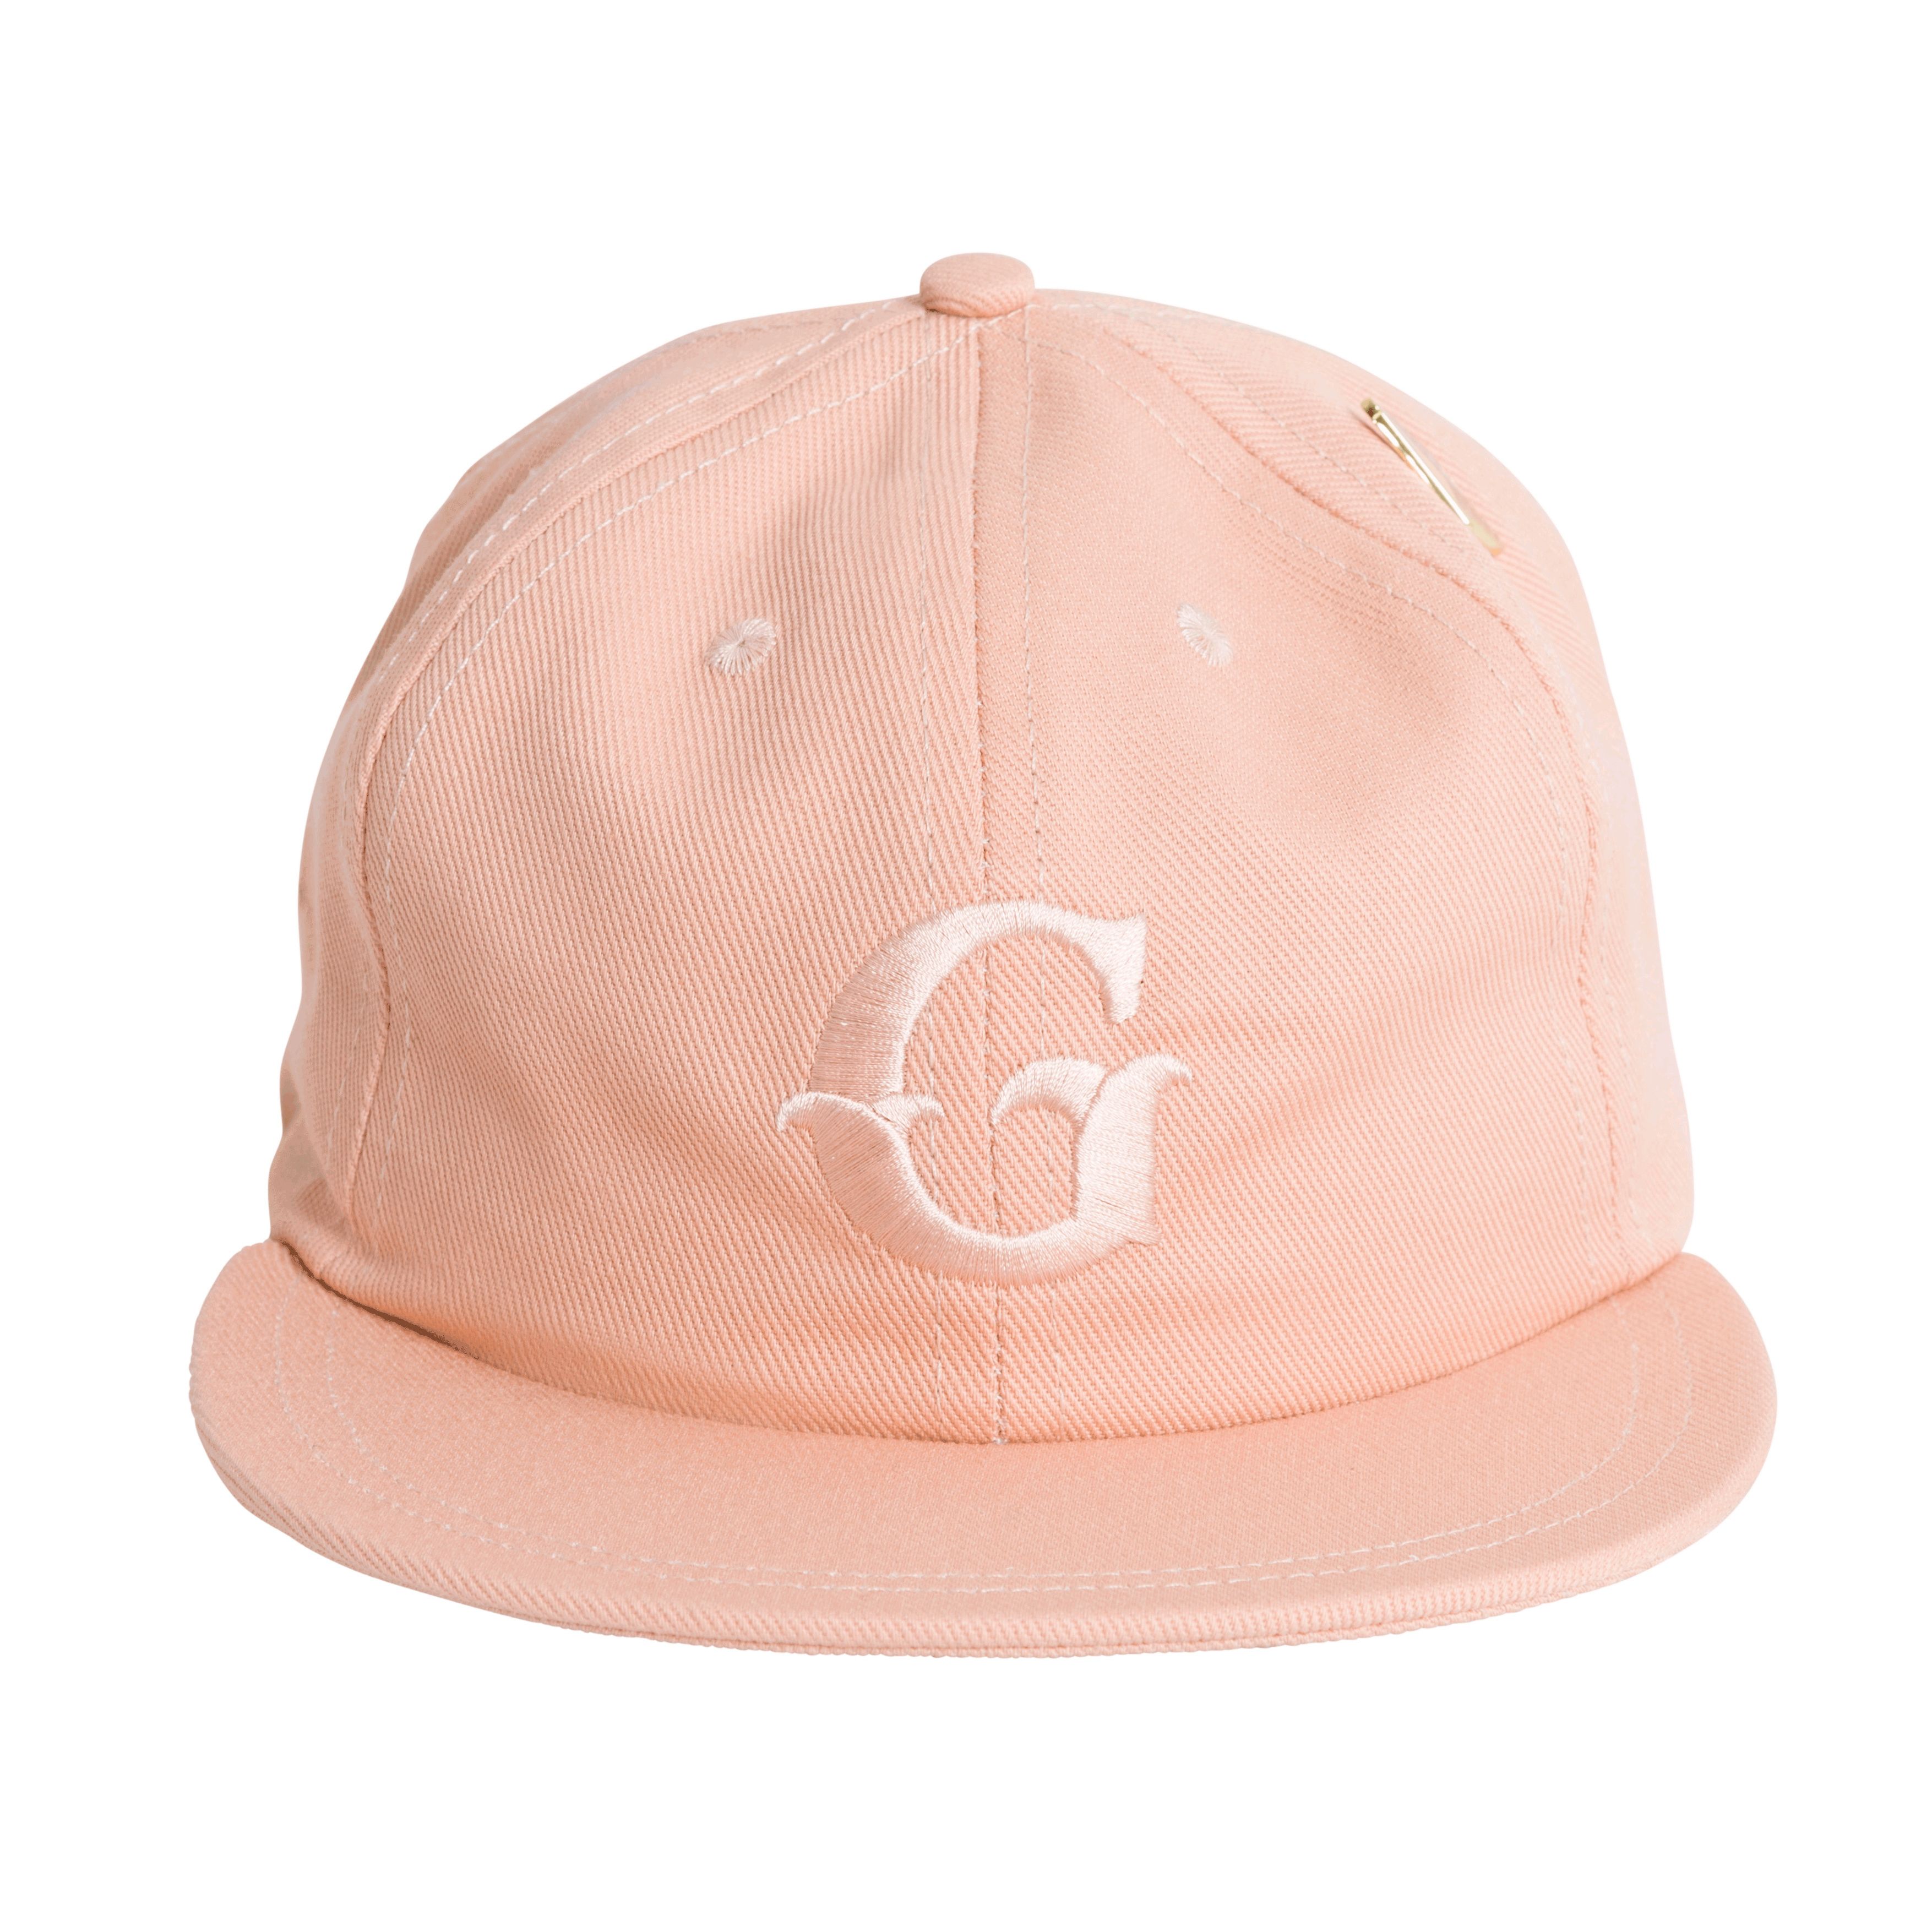 Unreleased Sample G cap by Gardens and Seeds | Basic.Space